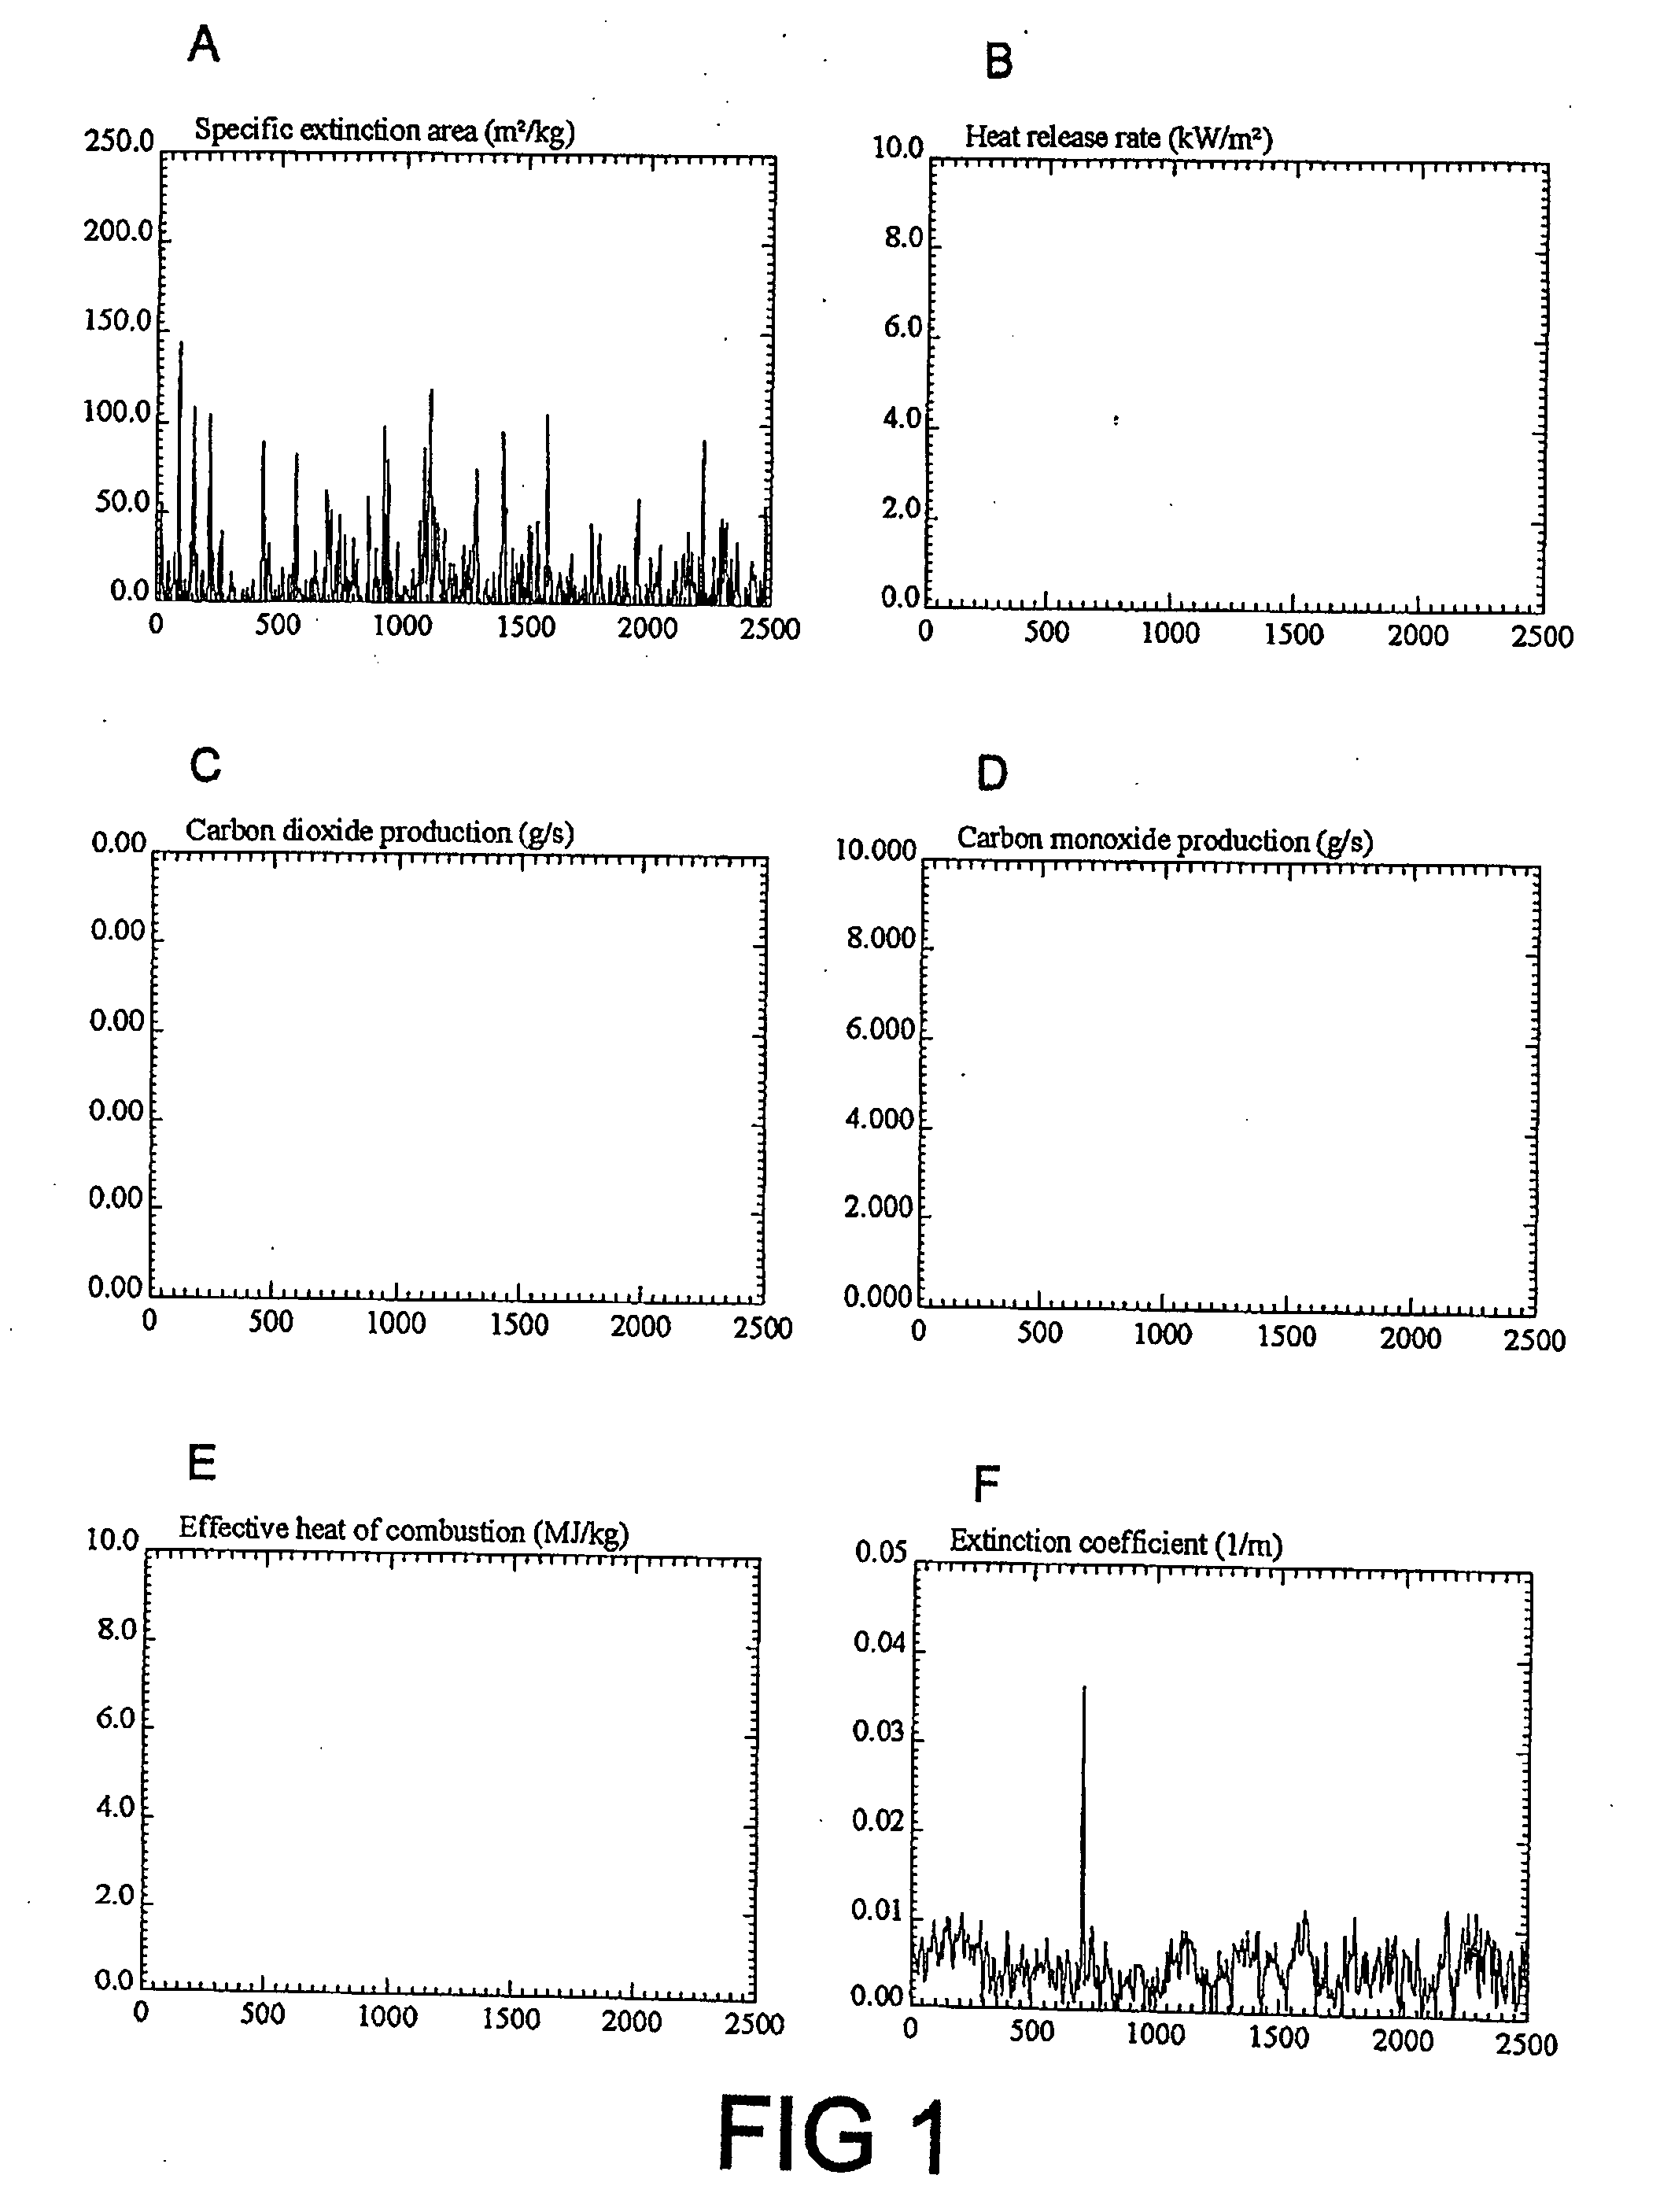 Fire retardant compositions and methods of use